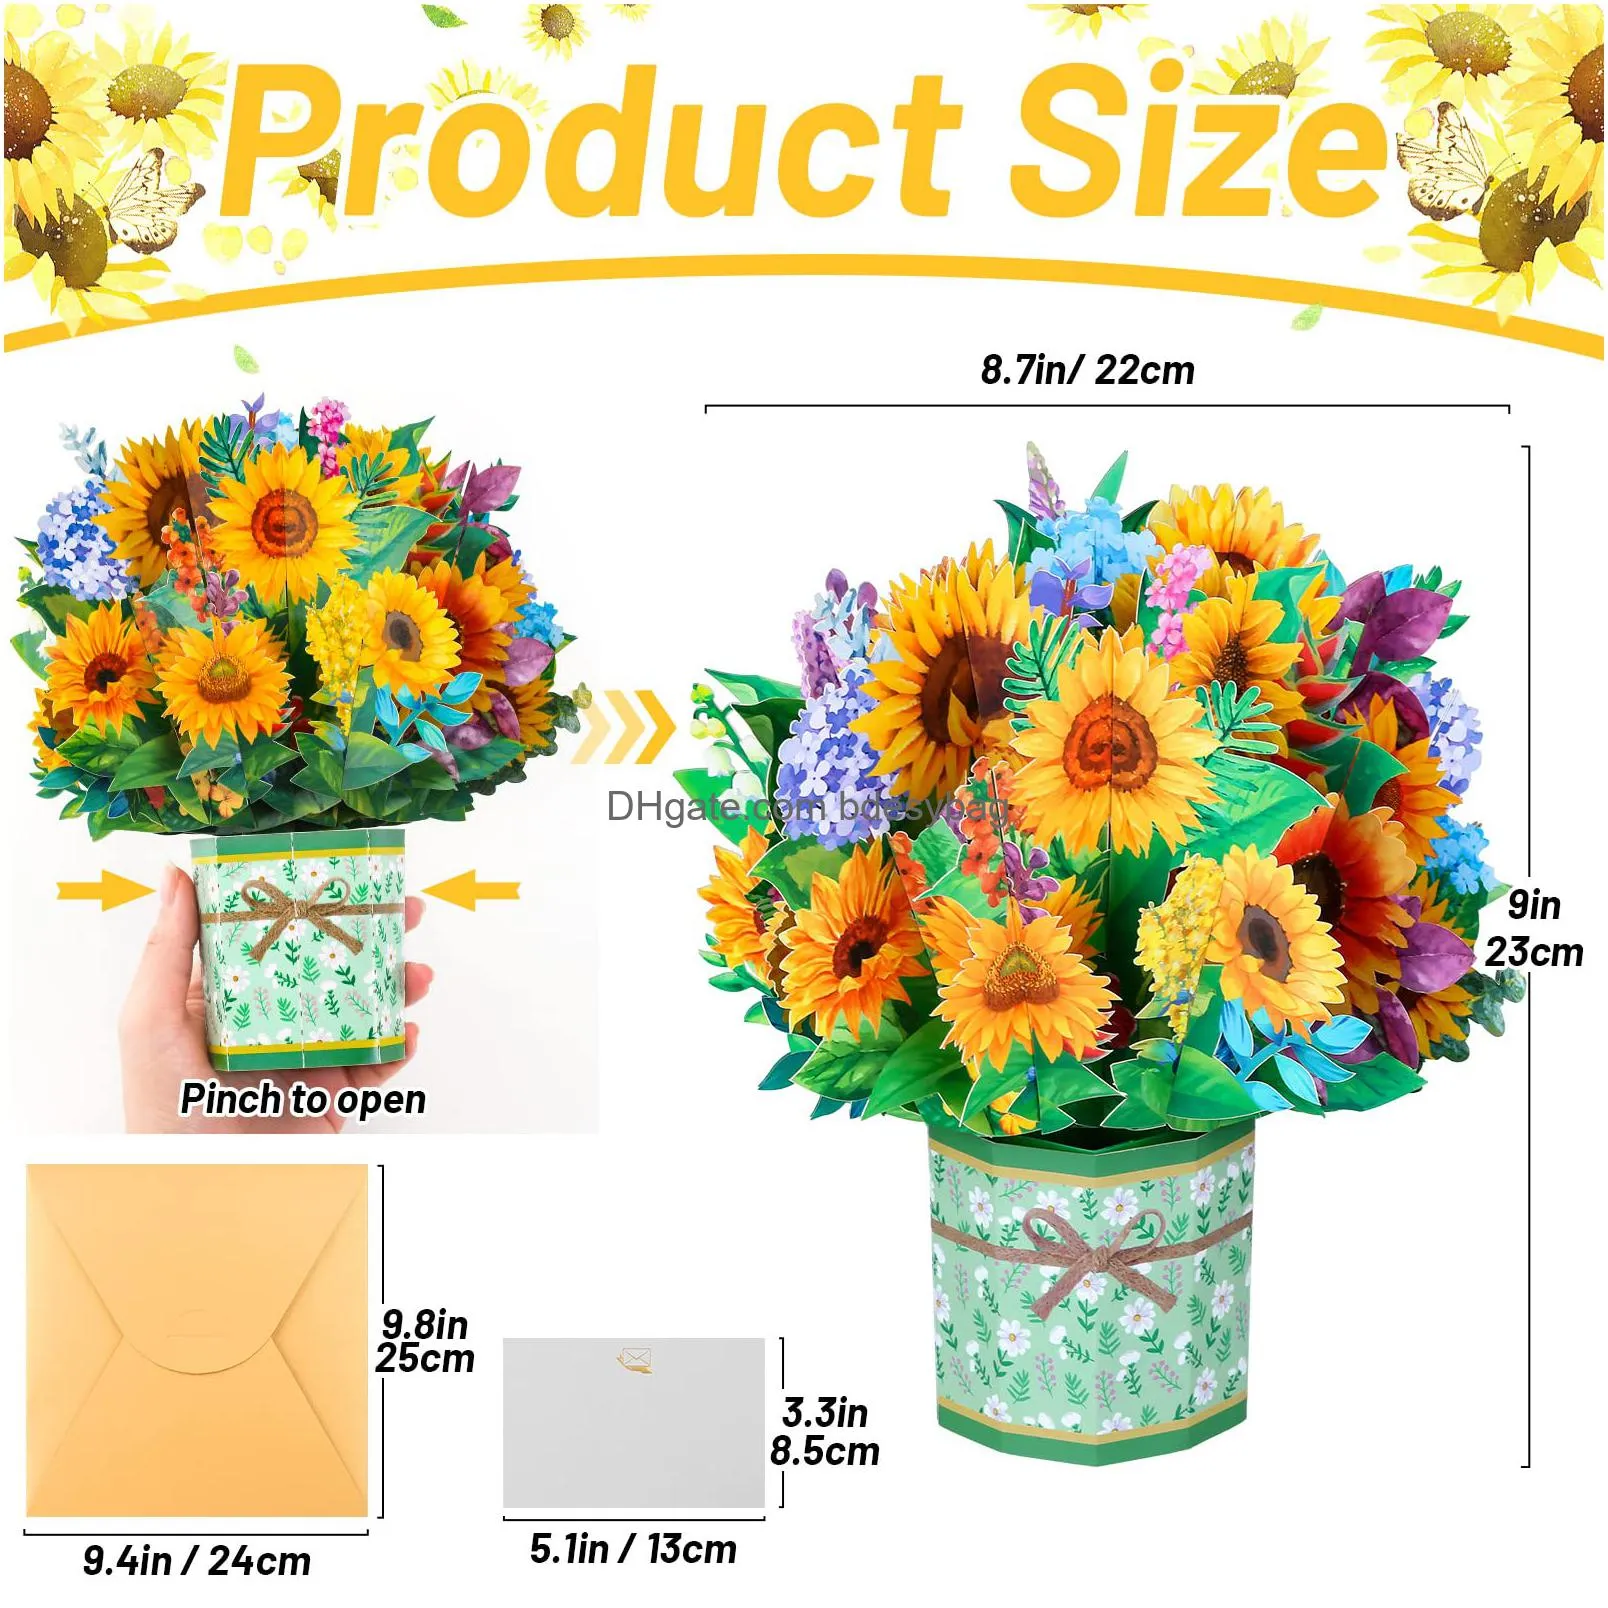 get well soon  up cards 3d paper flowers bouquet greeting cards sunflower birthday popup cards congratulations gifts for women boss best friends mother parents birthday anniversary